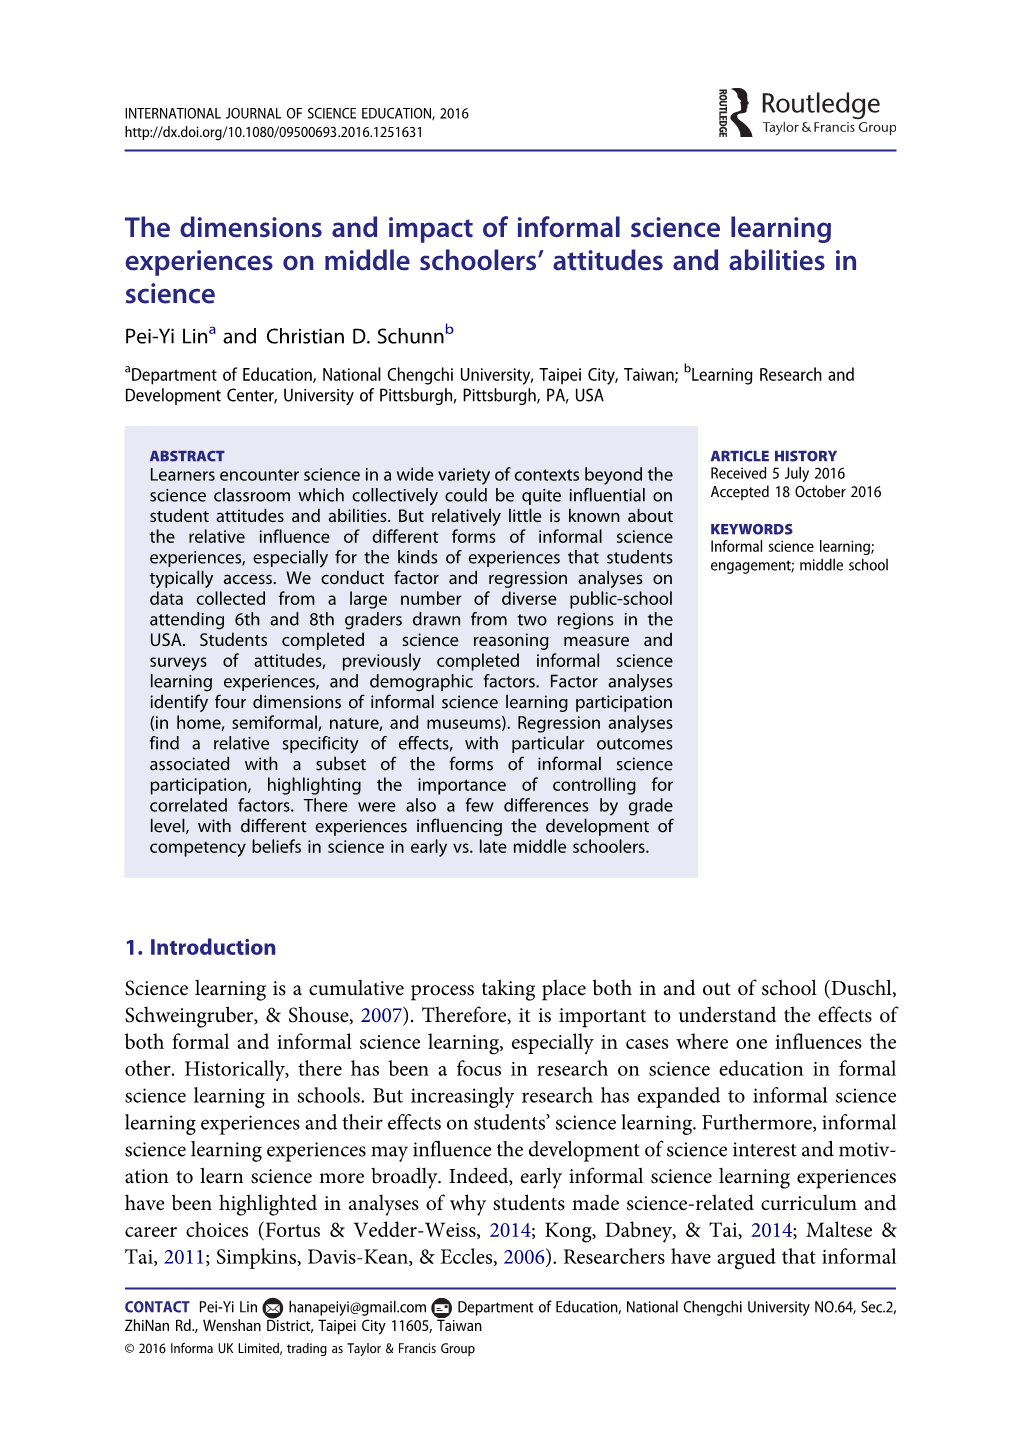 The Dimensions and Impact of Informal Science Learning Experiences on Middle Schoolers’ Attitudes and Abilities in Science Pei-Yi Lina and Christian D